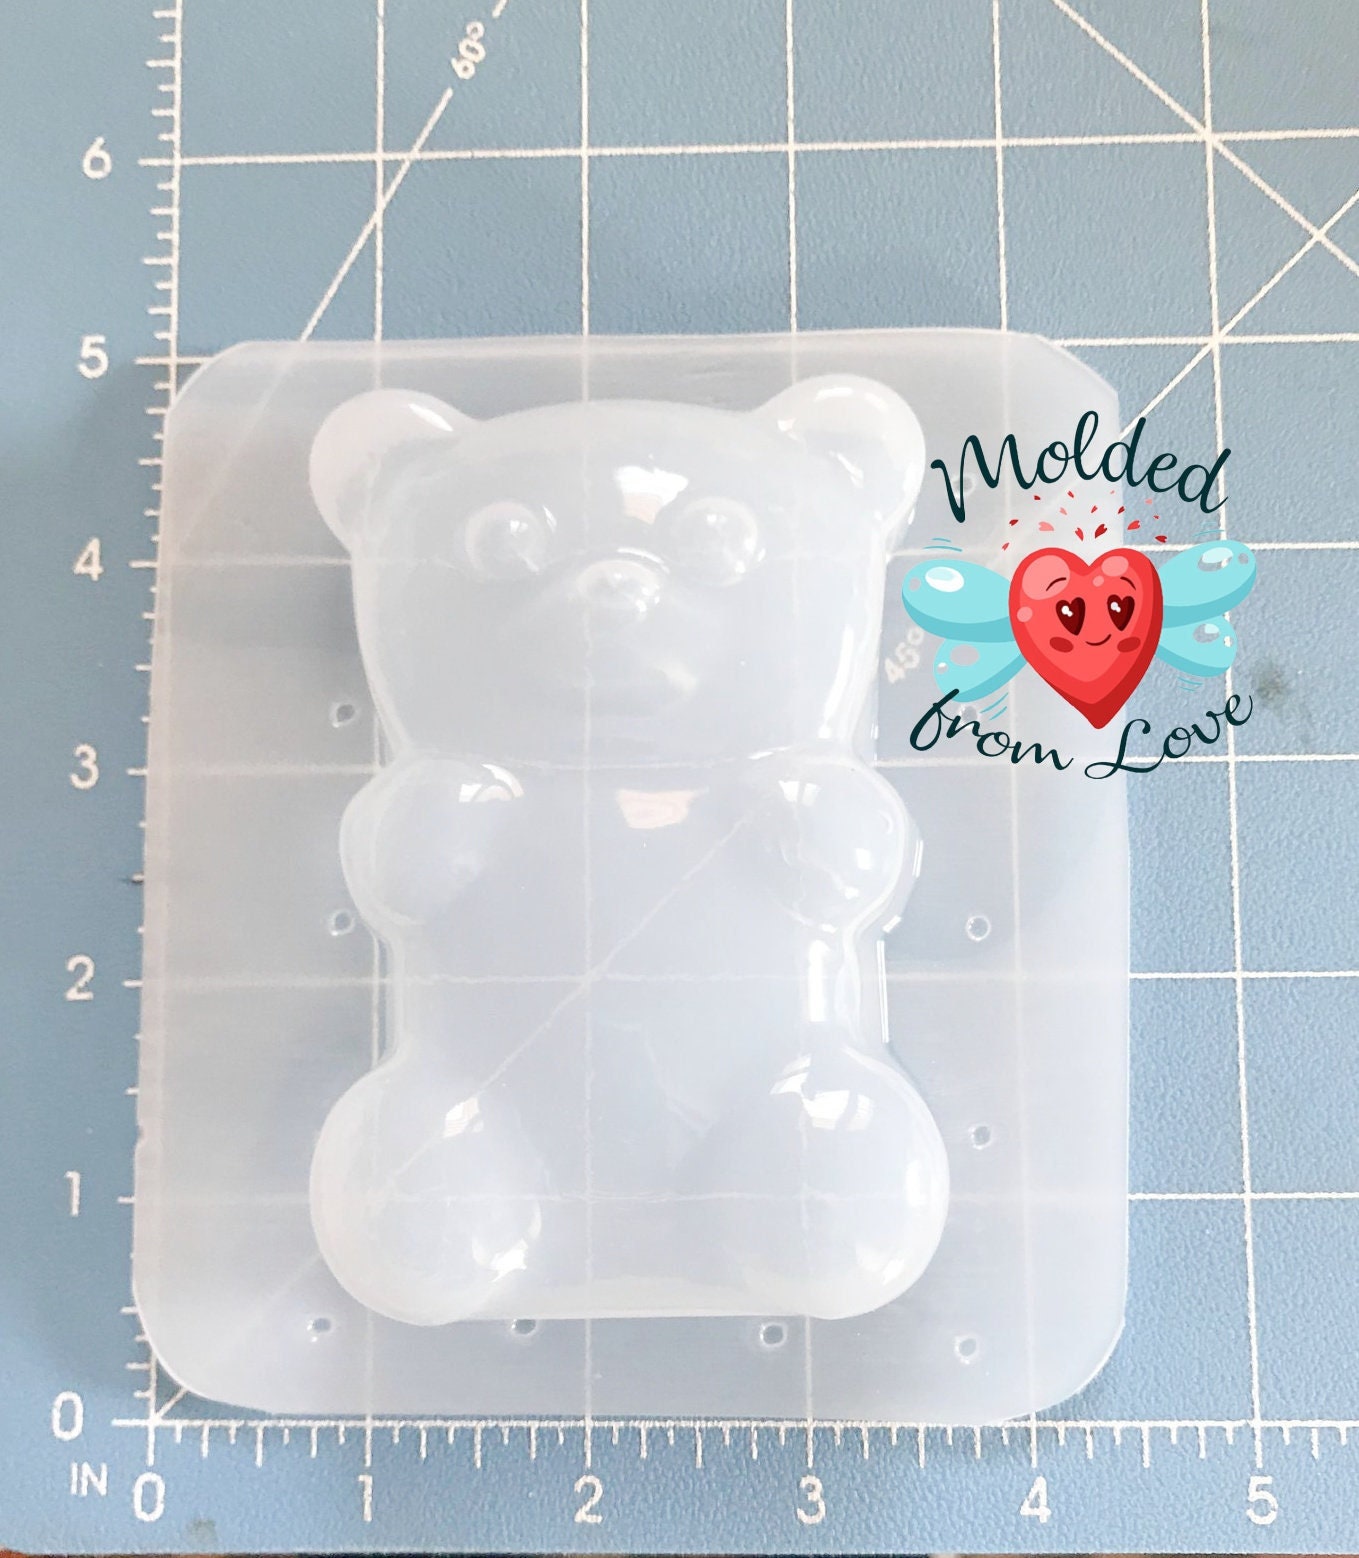  DIY Jumbo Gummy Bear Mold by Mister Gummy  Make Your Own  Medium Sized Gummy Bears, Chocolates, Soaps, Candles, Bath Bombs, Ice, Decor  Bears, Baked Goods, and More! (TWO PACK) 